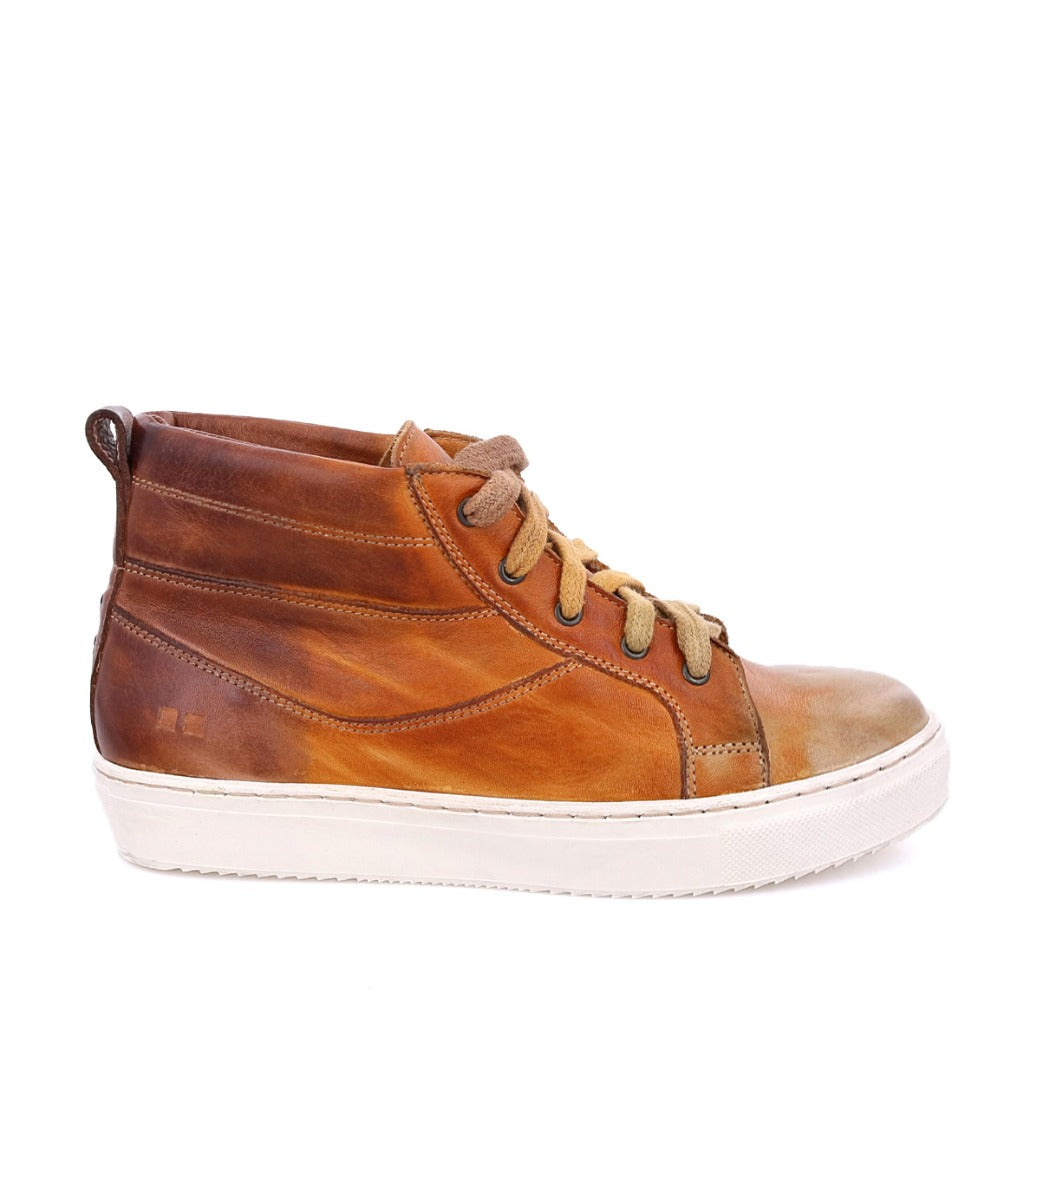 A men's brown leather high top sneaker, the Rossela by Bed Stu.